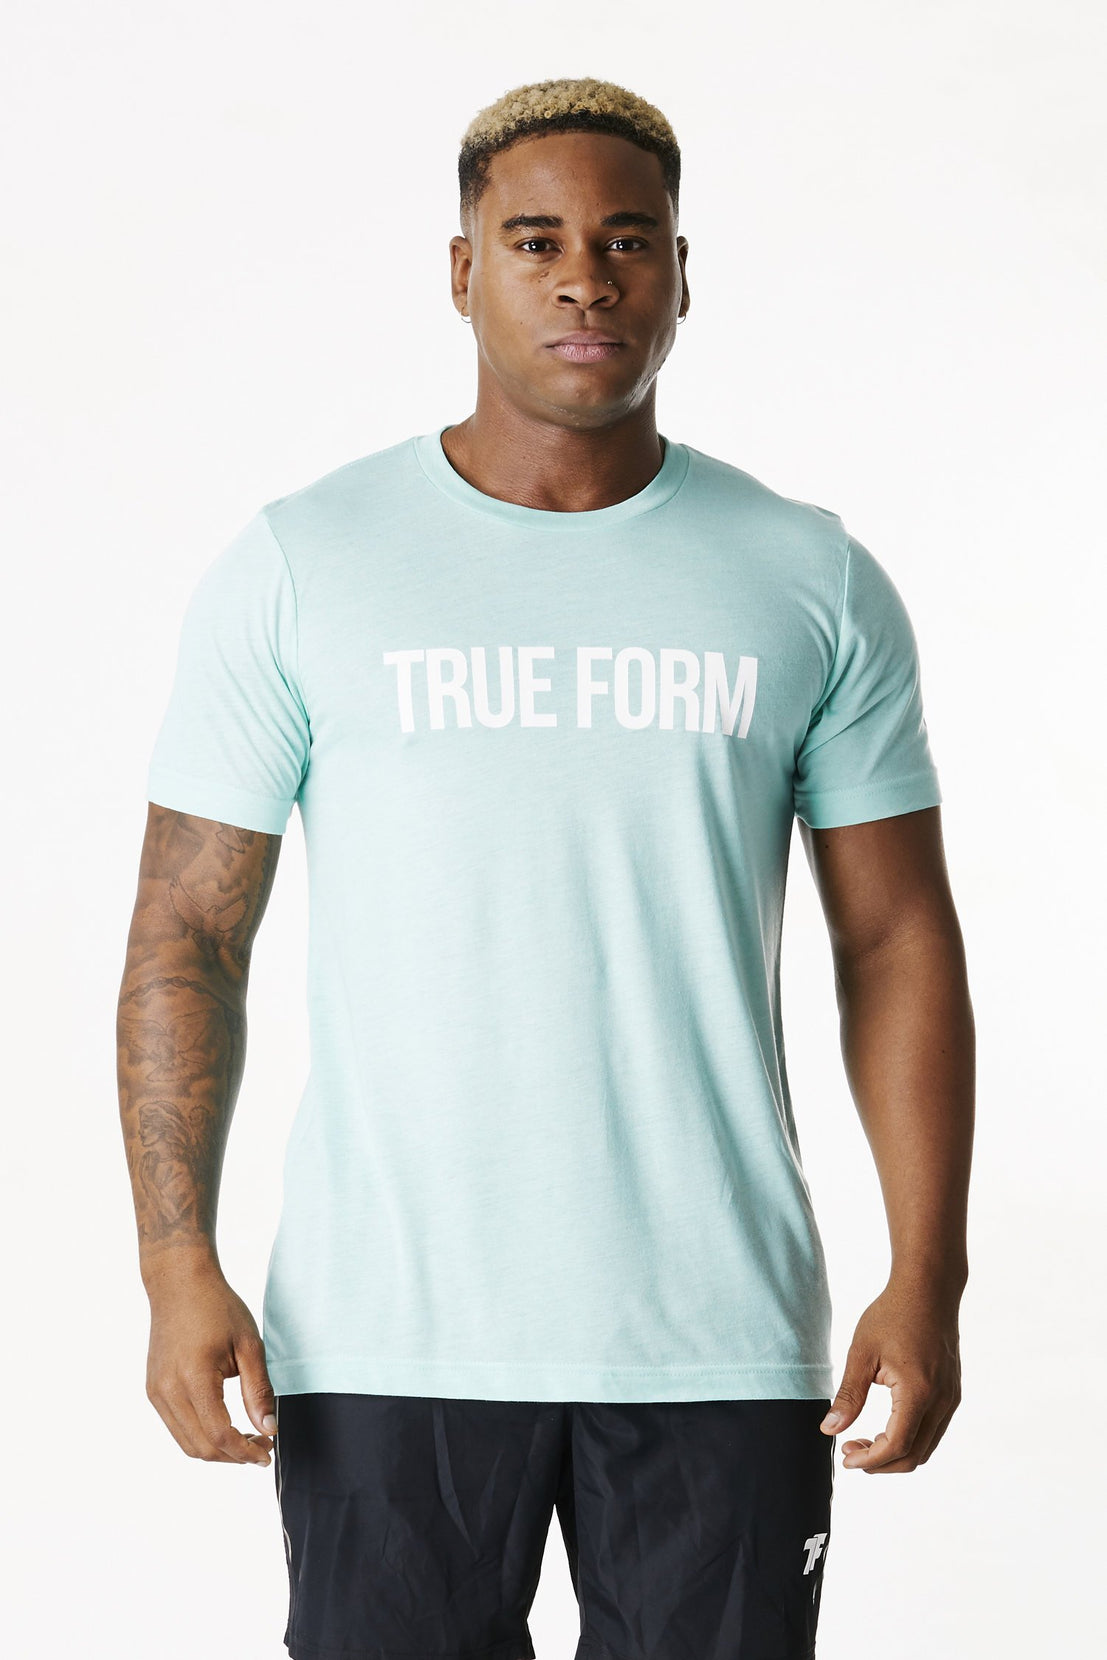 unisex tshirt mint collection of gym wear brand true form uk